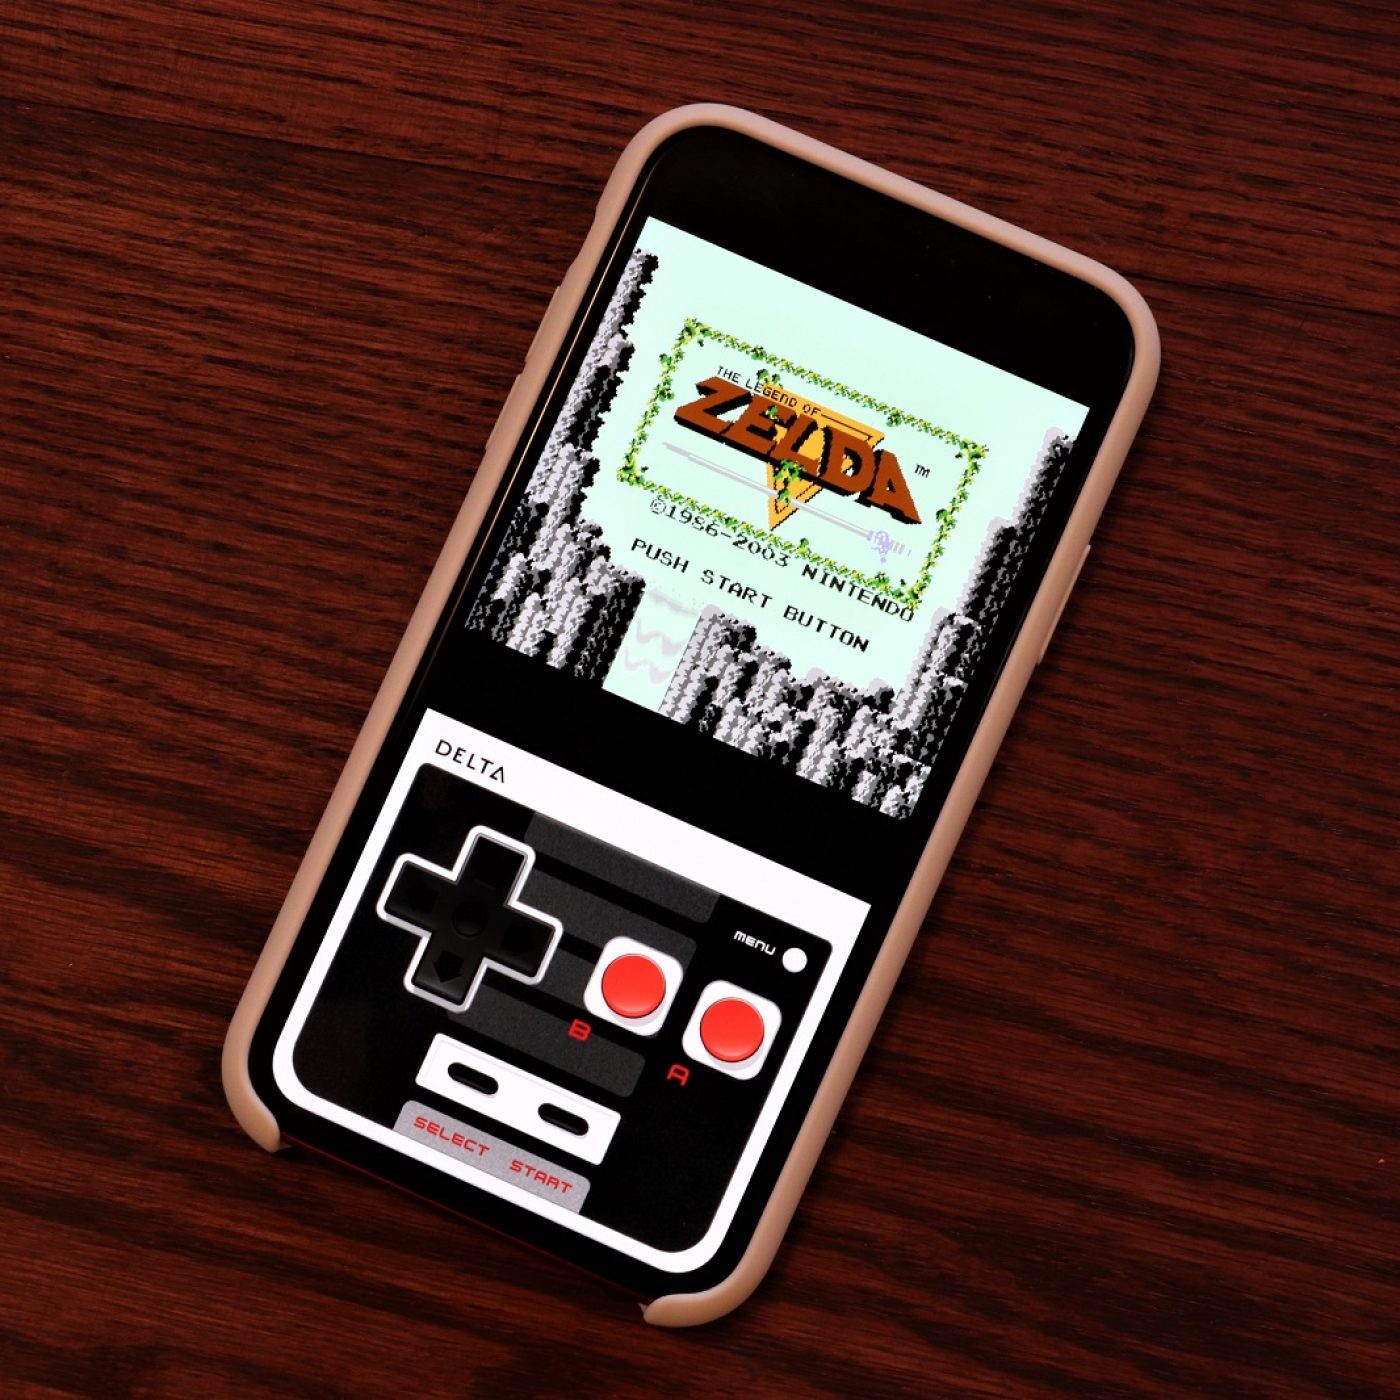 Game Boy Advance emulator available for iOS 7, without jailbreak